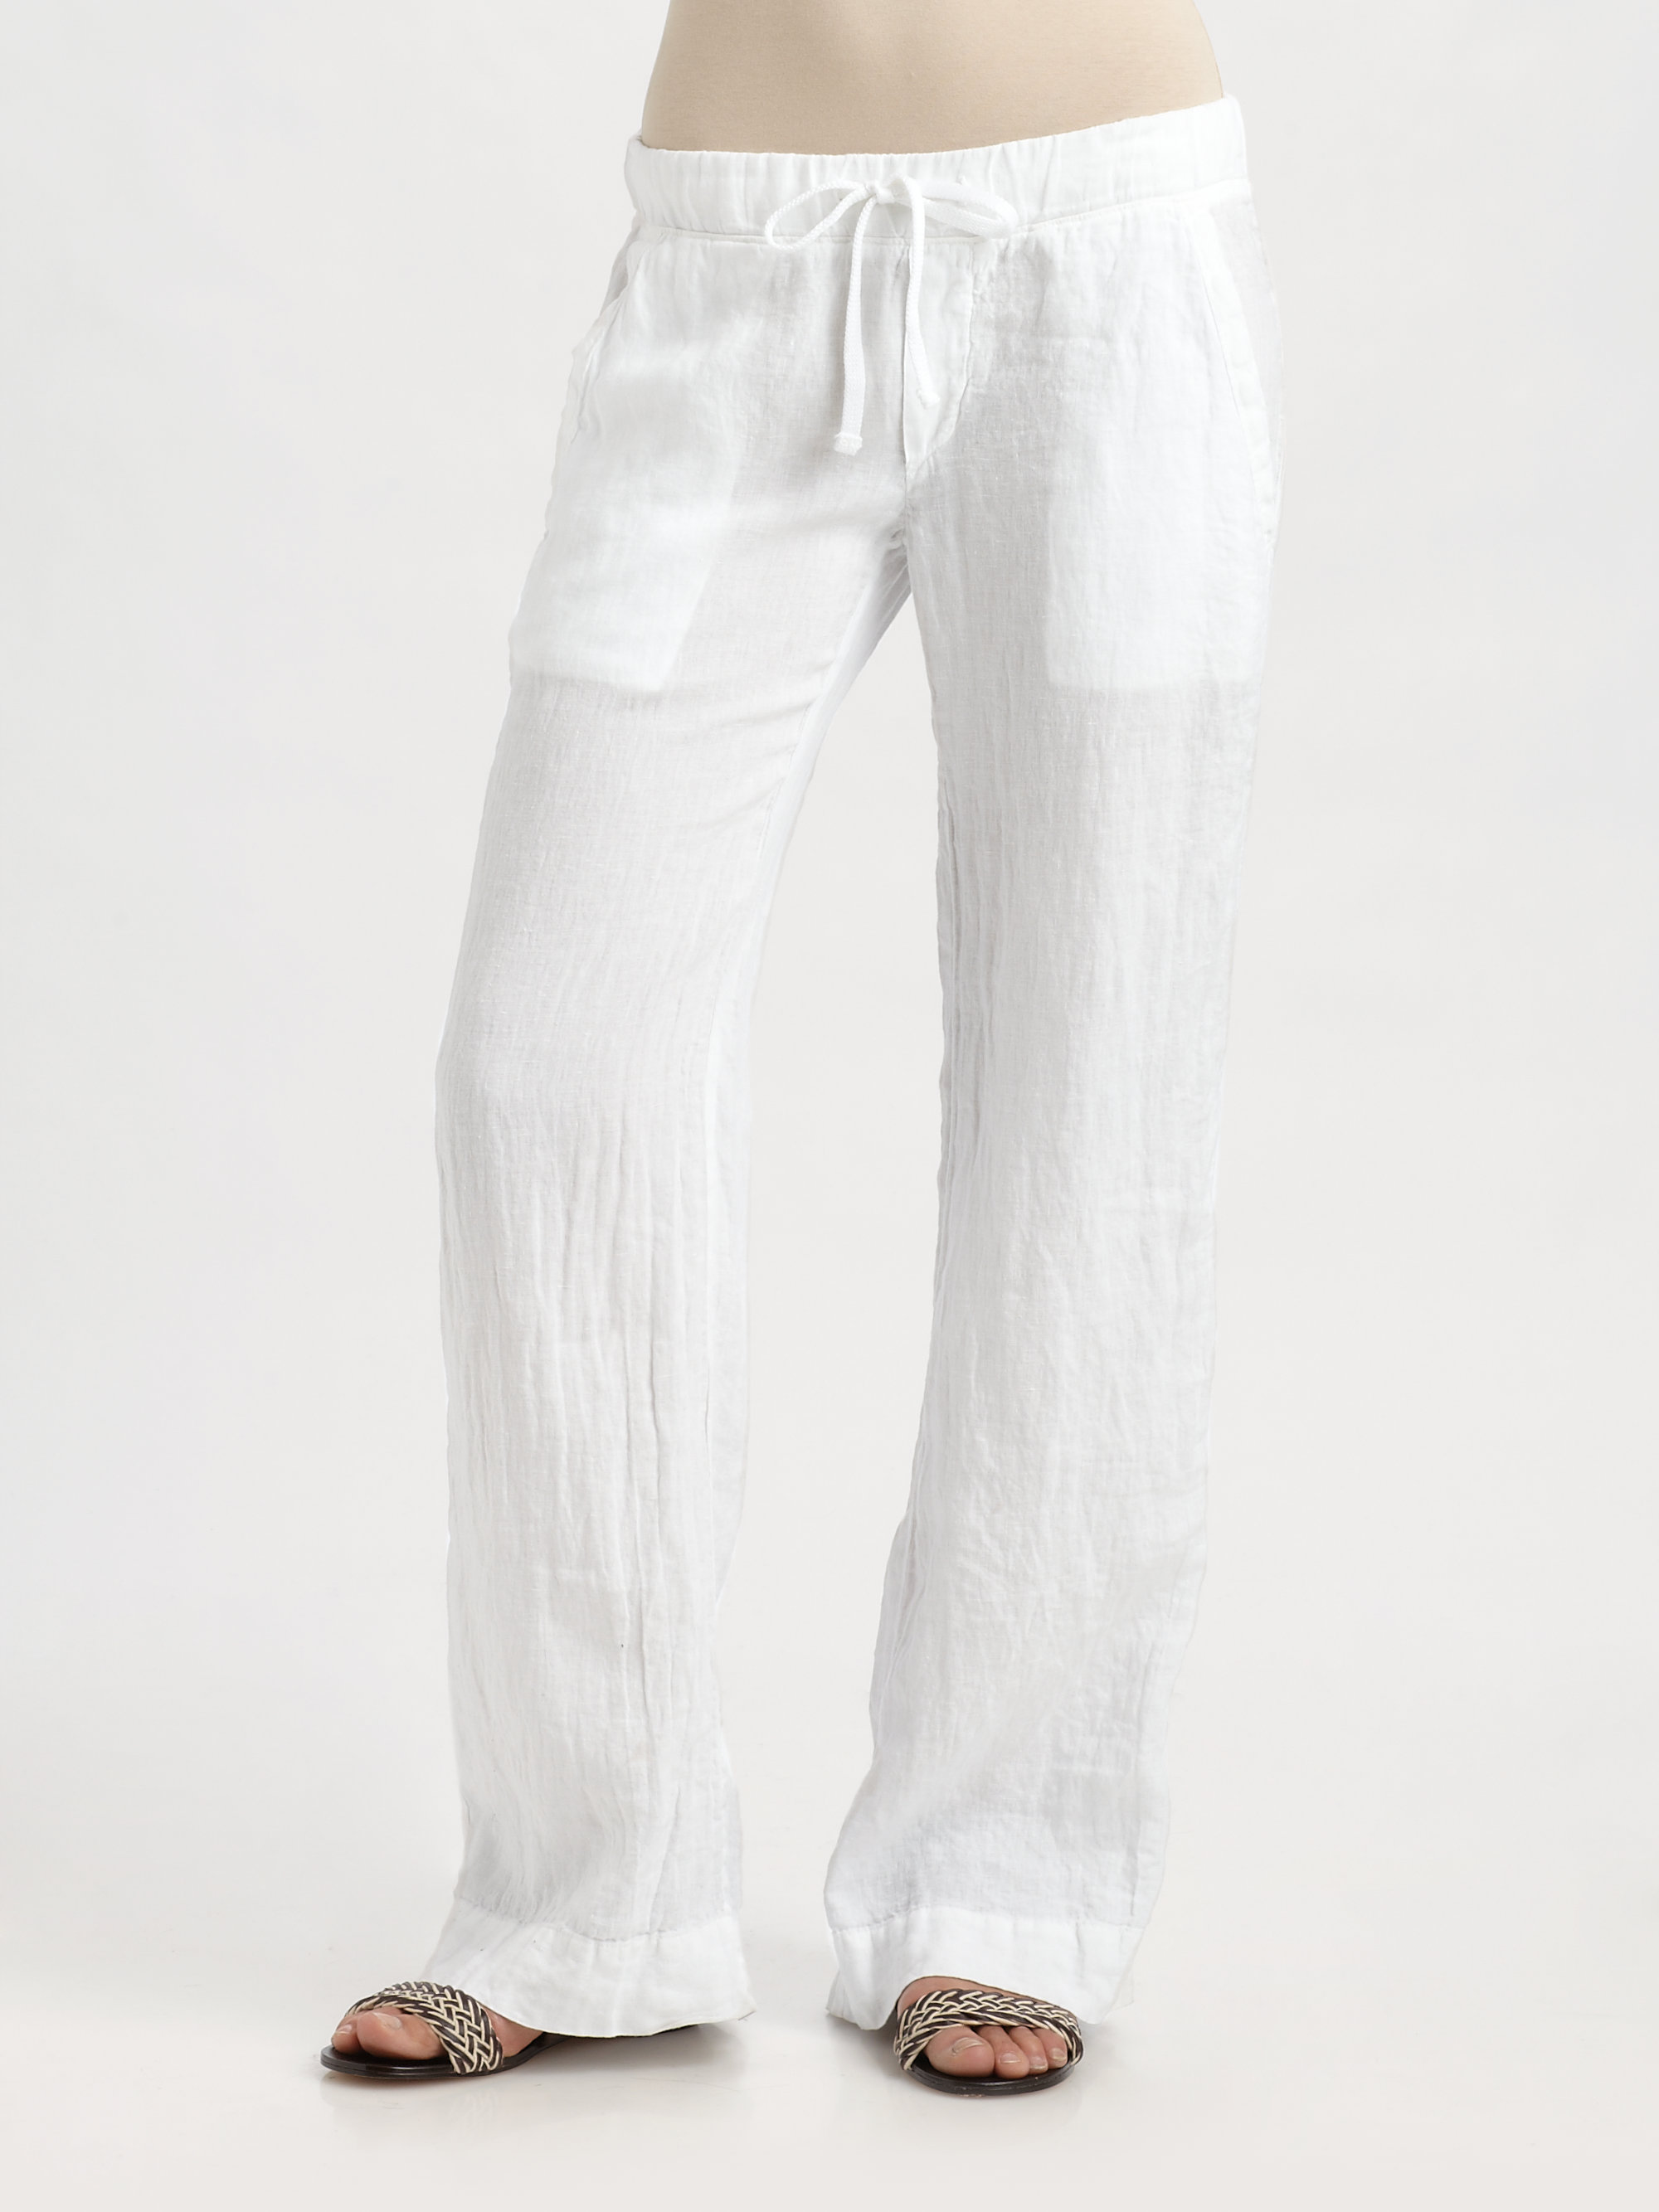 James Perse Linen Drawstring Pants in White | Lyst